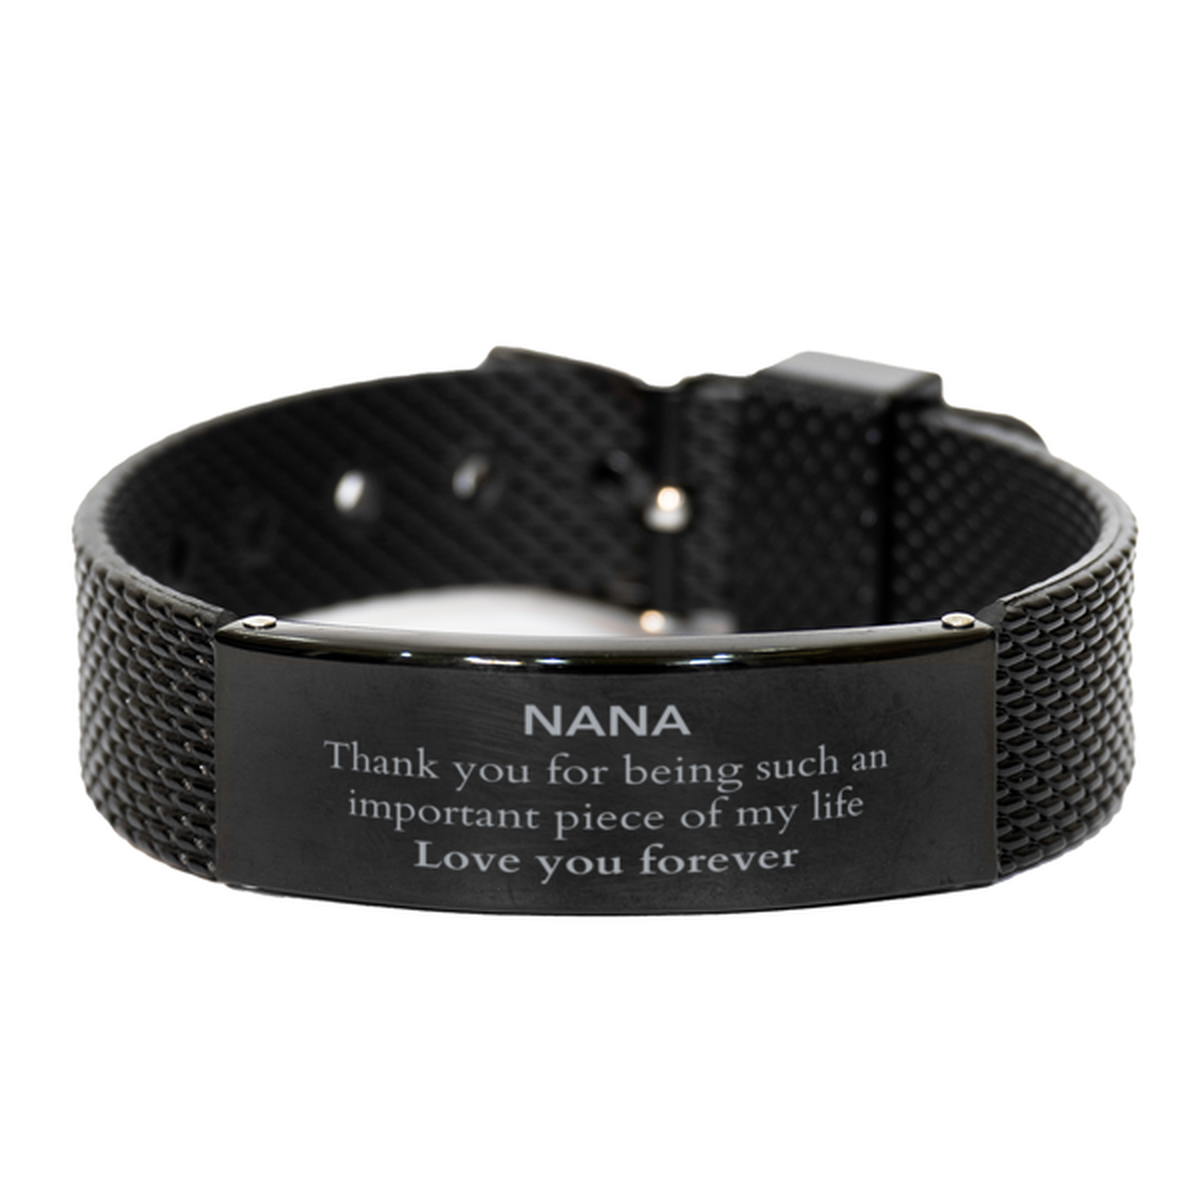 Appropriate Nana Black Shark Mesh Bracelet Epic Birthday Gifts for Nana Thank you for being such an important piece of my life Nana Christmas Mothers Fathers Day